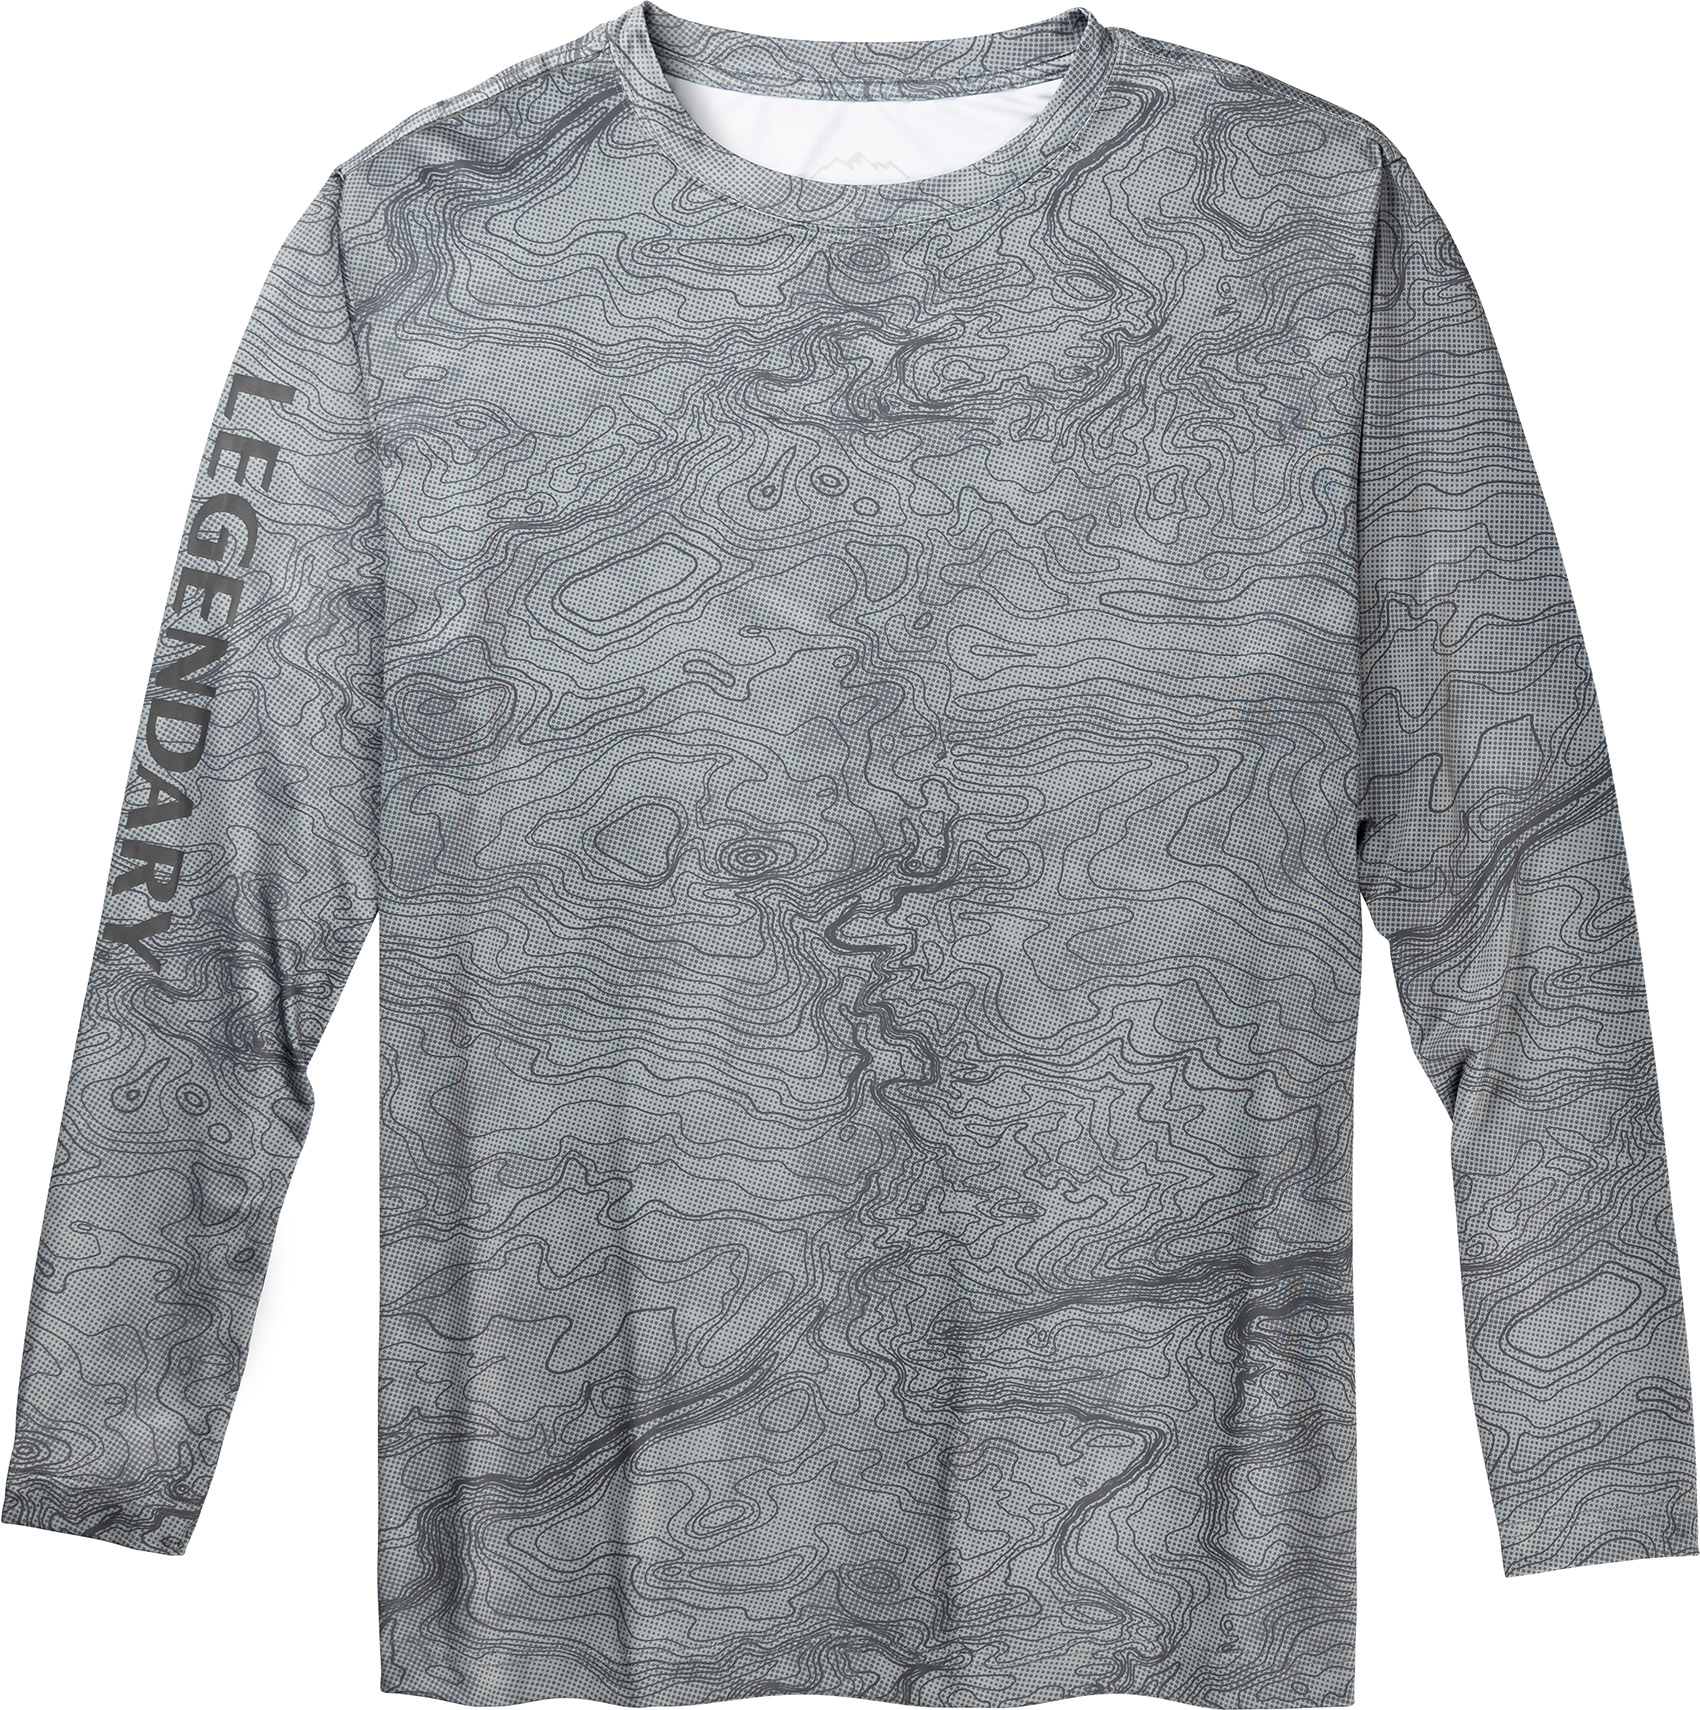 Shop Men's Moisture Wicking UPF Sun Protection Topographical Print Long  Sleeve T-Shirt